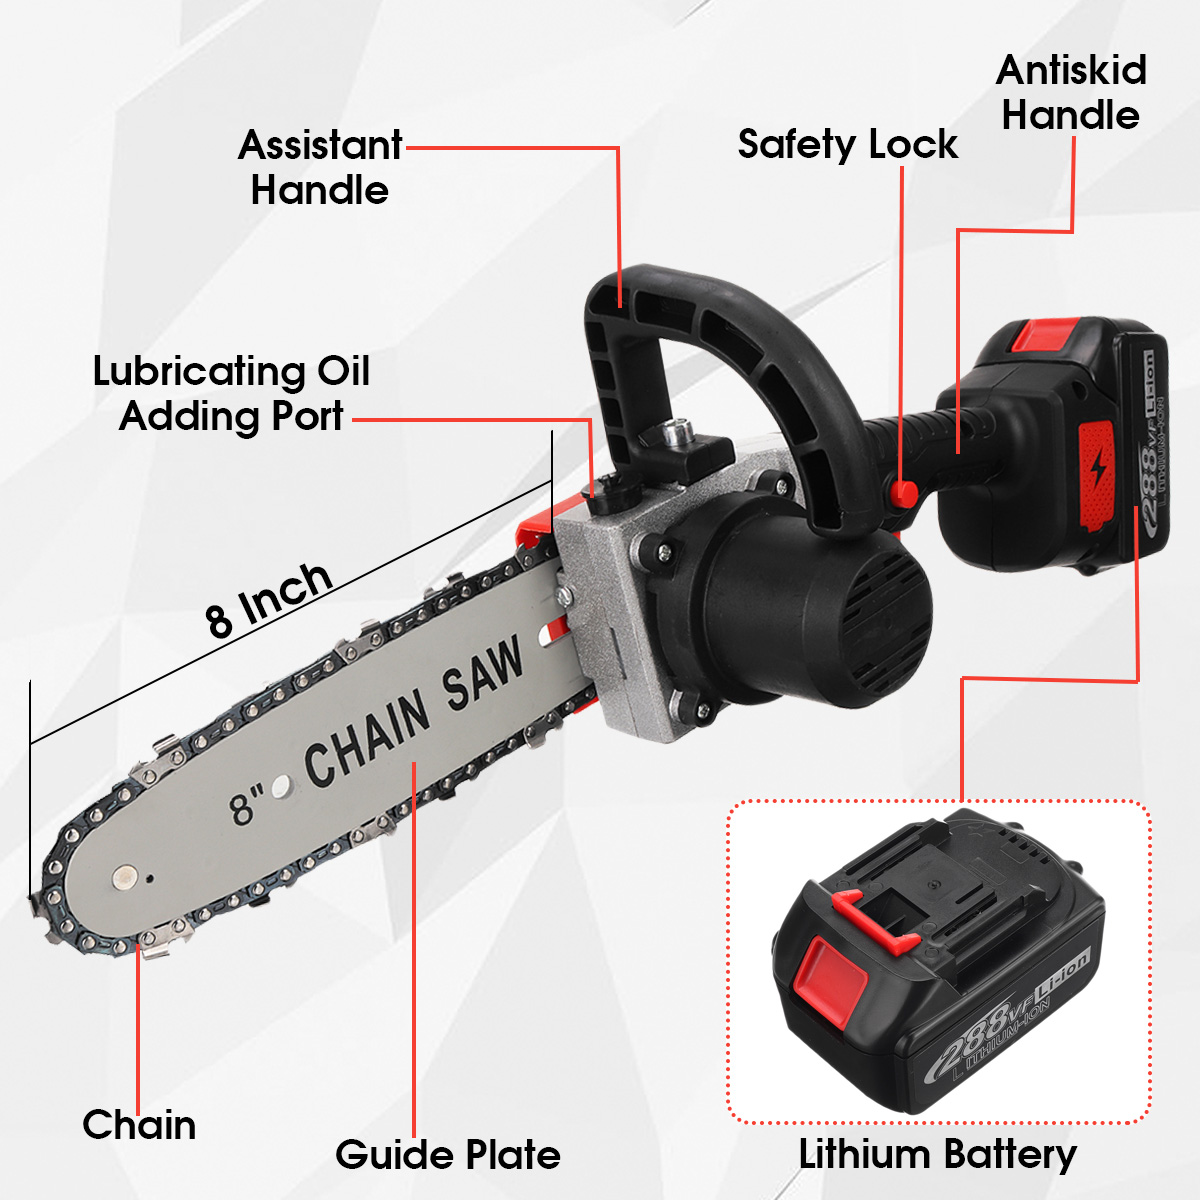 288VF-8Inch-Electric-Chain-Saw-Cordless-One-Hand-Chainsaw-Woodworking-Tool-W-12None-Battery-1845268-6